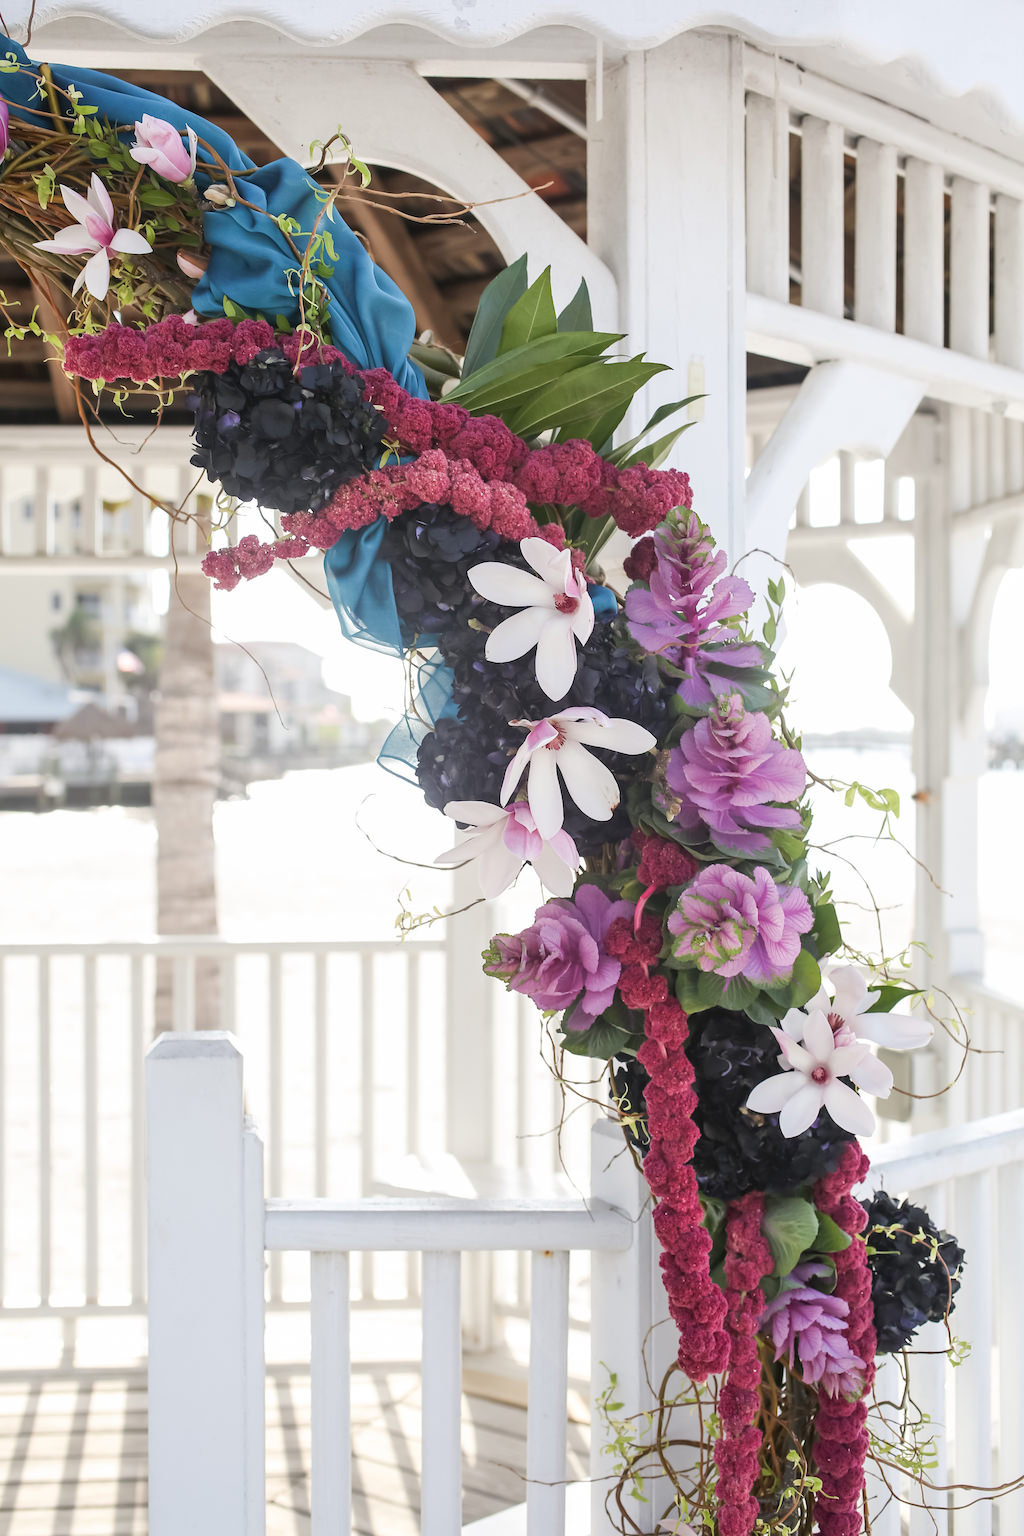 Whimsical Purple, Black, Magenta, Fuchsia, Plum and White Floral Wedding Arch with Greenery with Turquoise Draping | Tampa Bay Wedding Florist Gabro Event Services